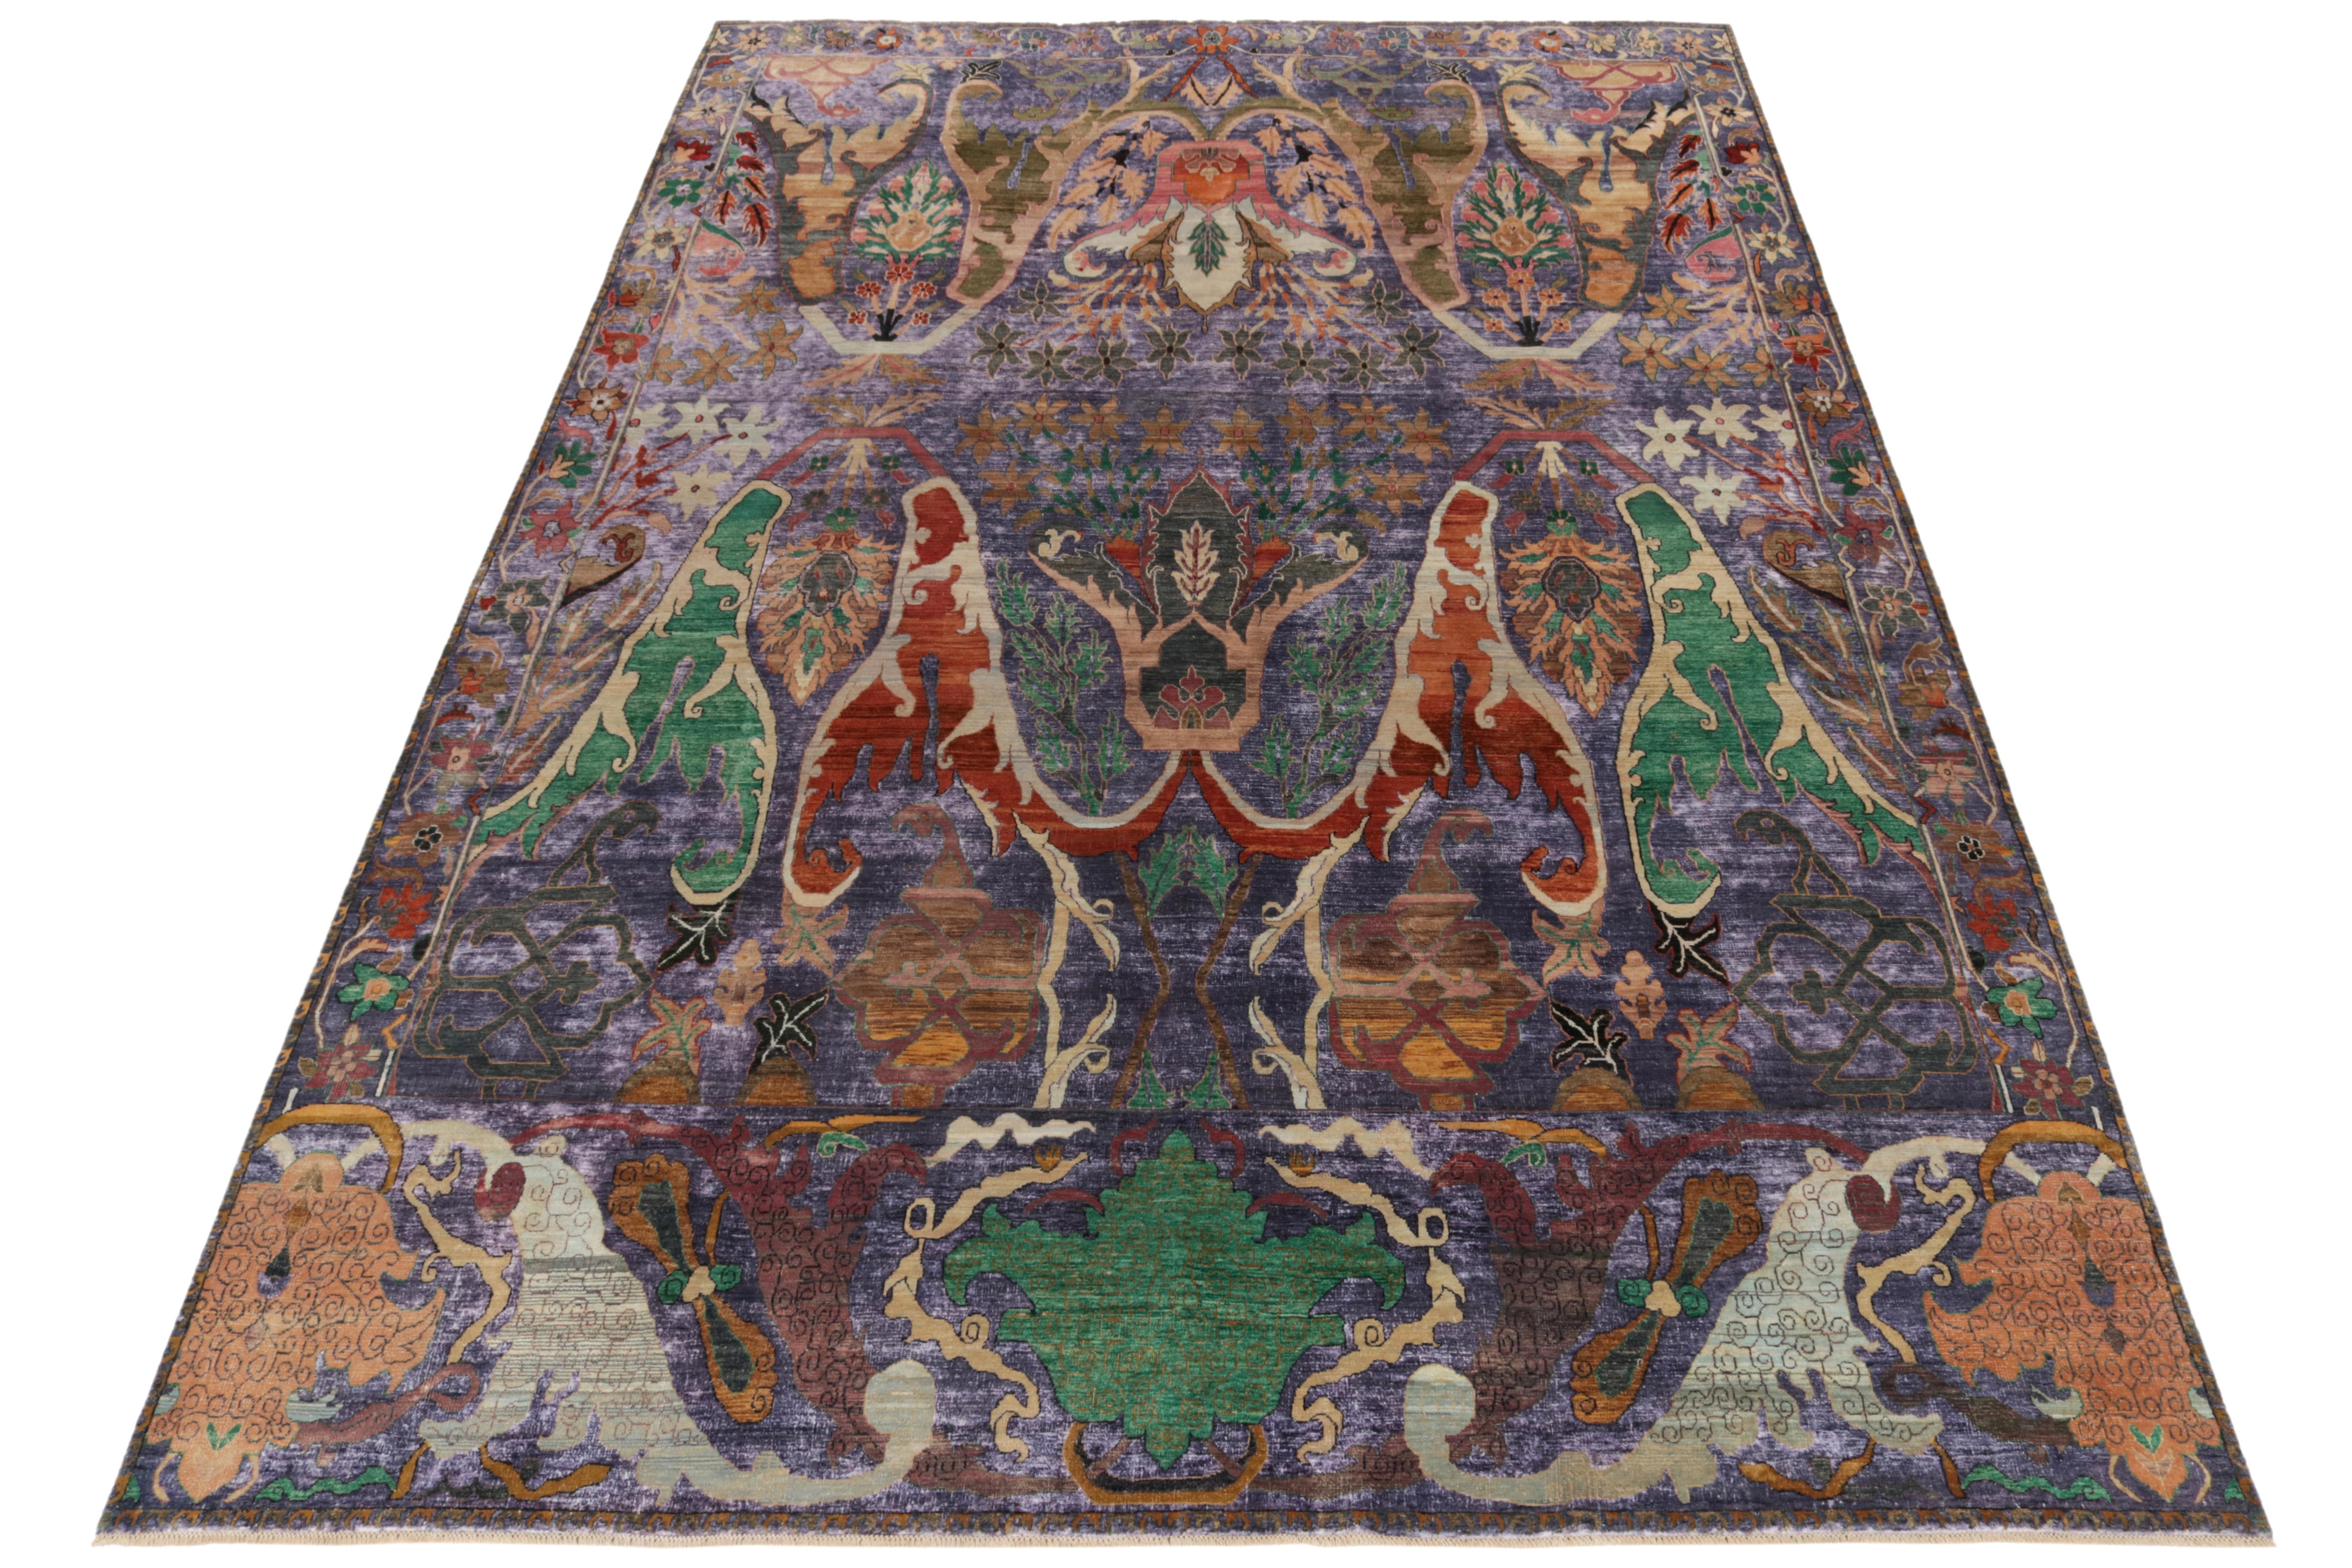 A splendid 10x14 rug with a unique approach inspired by transitional Indian sensibilities, joining Rug & Kilim’s Modern Classics Collection. 

Hand-knotted in healthy, lustrous wool, the carpet enjoys grandeur with uniquely scaled floral patterns